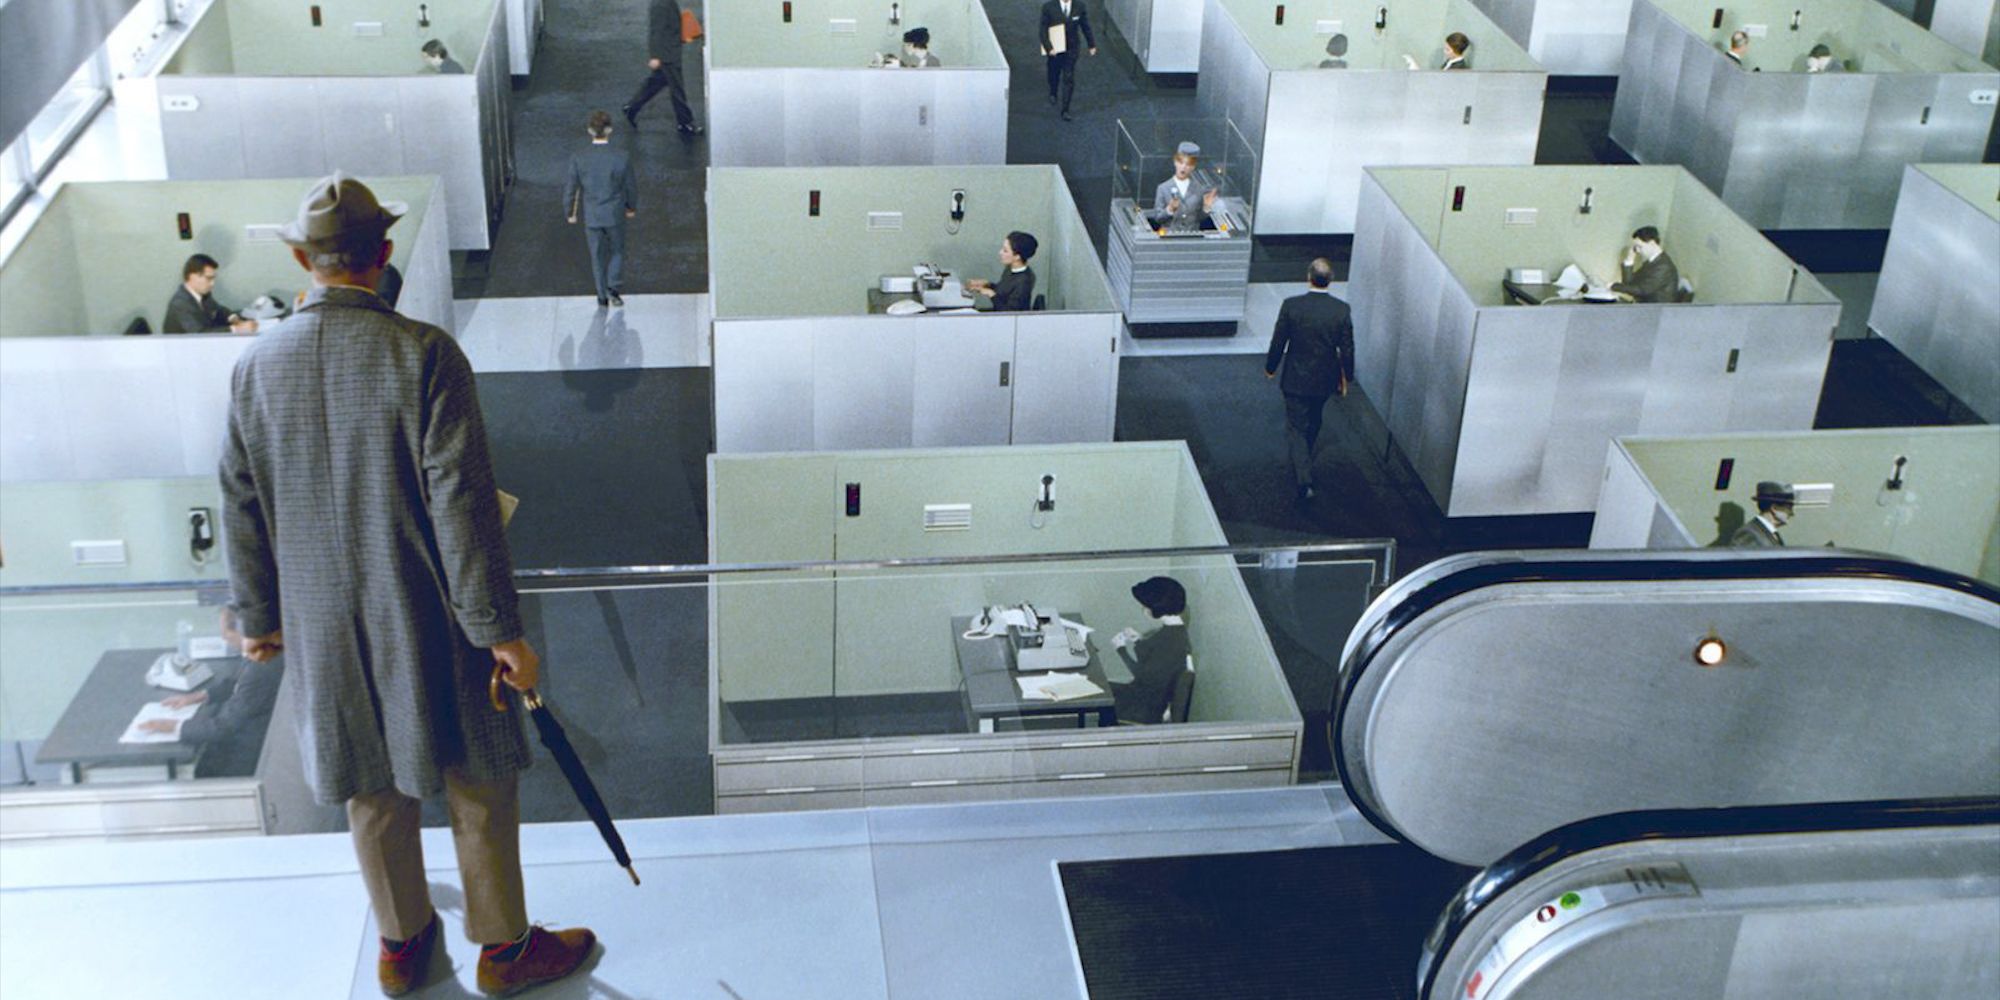 A man looking at people working in cubicles.